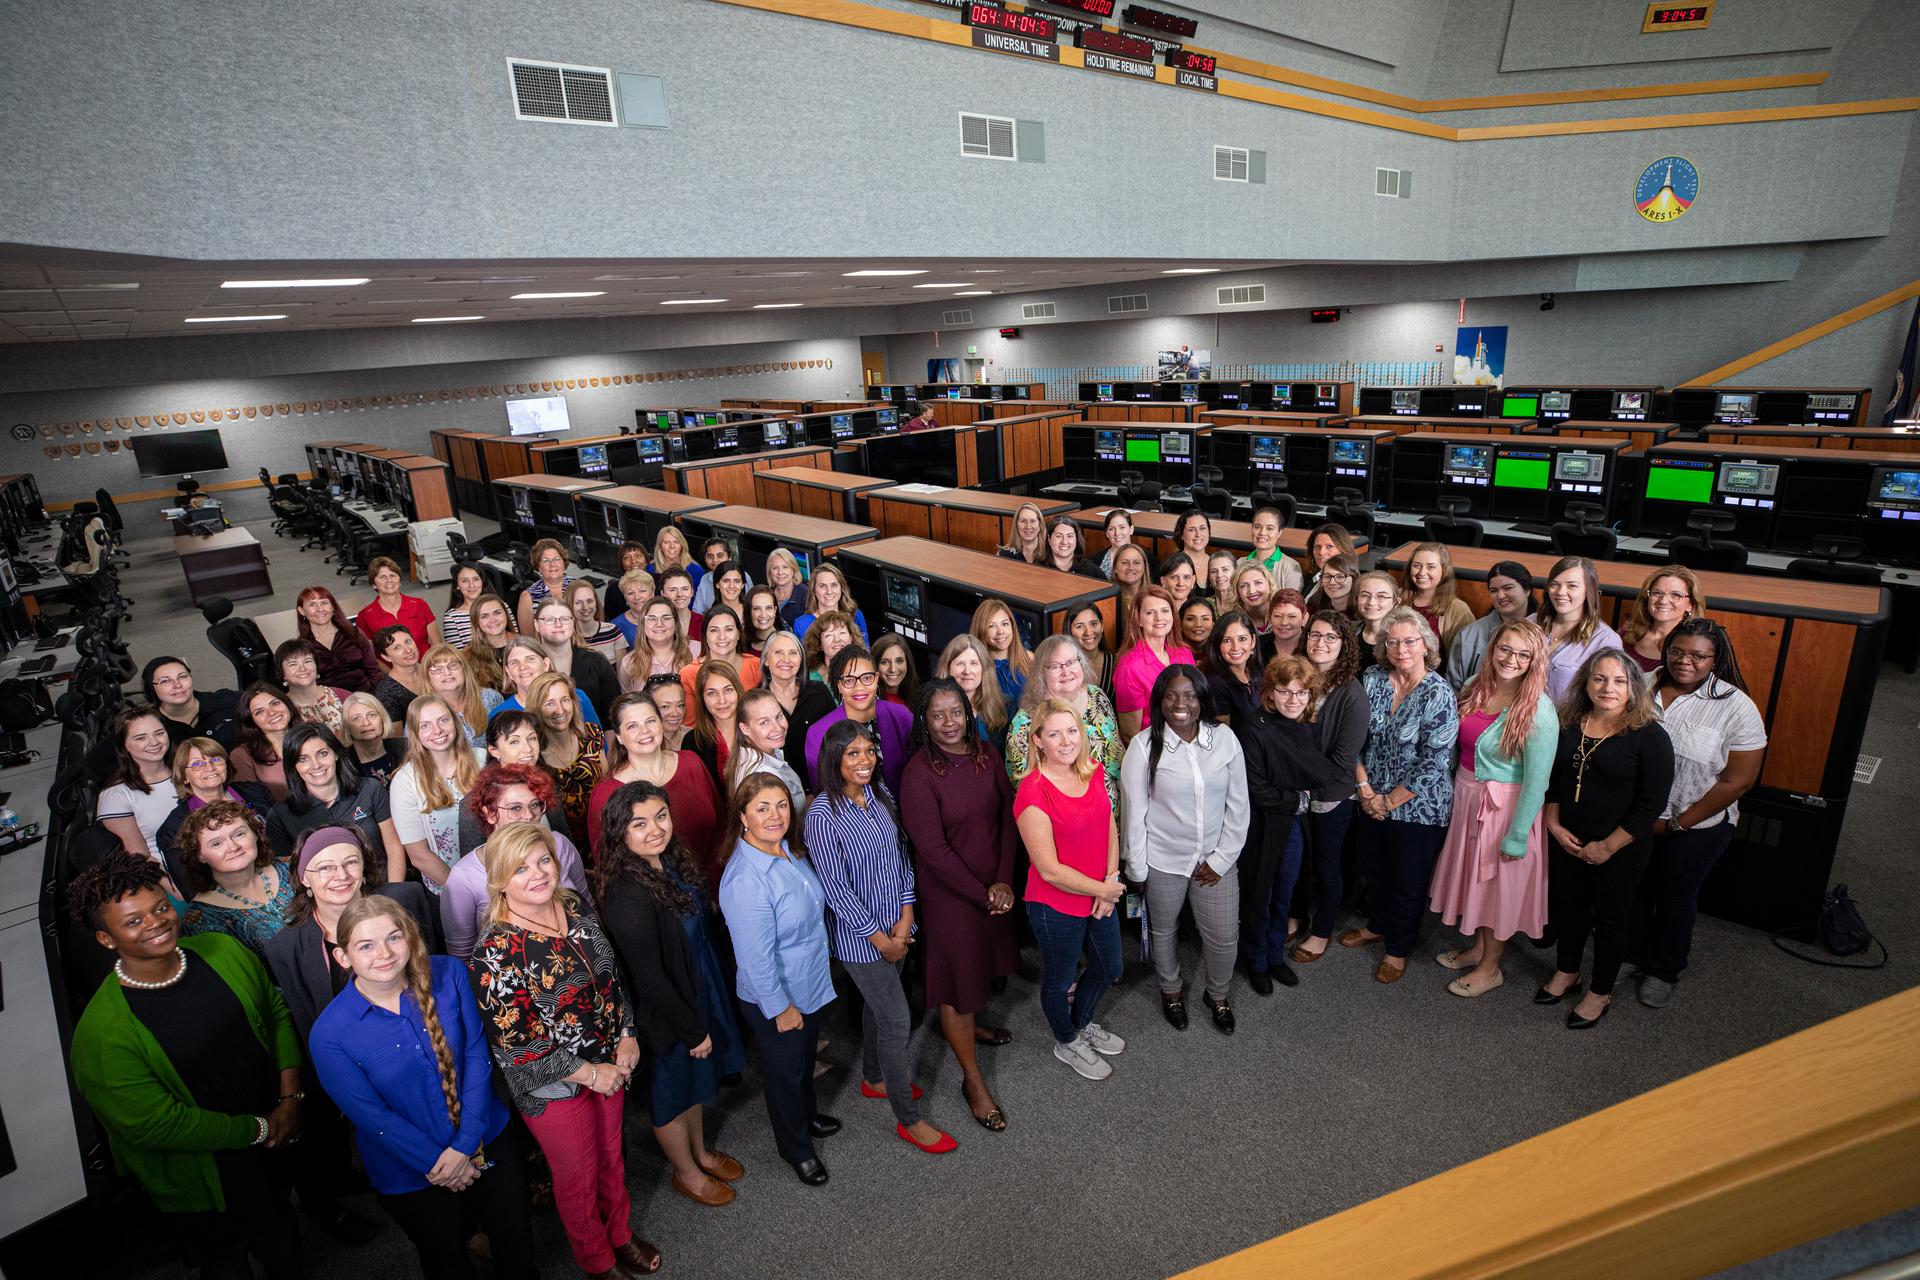 In celebration of Women’s History Month, the “Women of Launch Control” working in Exploration Ground Systems take time out of their Artemis I launch planning to pose for a photo in Firing Room 1 of the Launch Control Center at NASA’s Kennedy Space Center in Florida on March 4, 2020. Artemis I will be the first integrated flight test of the Orion spacecraft and Space Launch System rocket, the system that will ultimately land the first woman and the next man on the Moon.